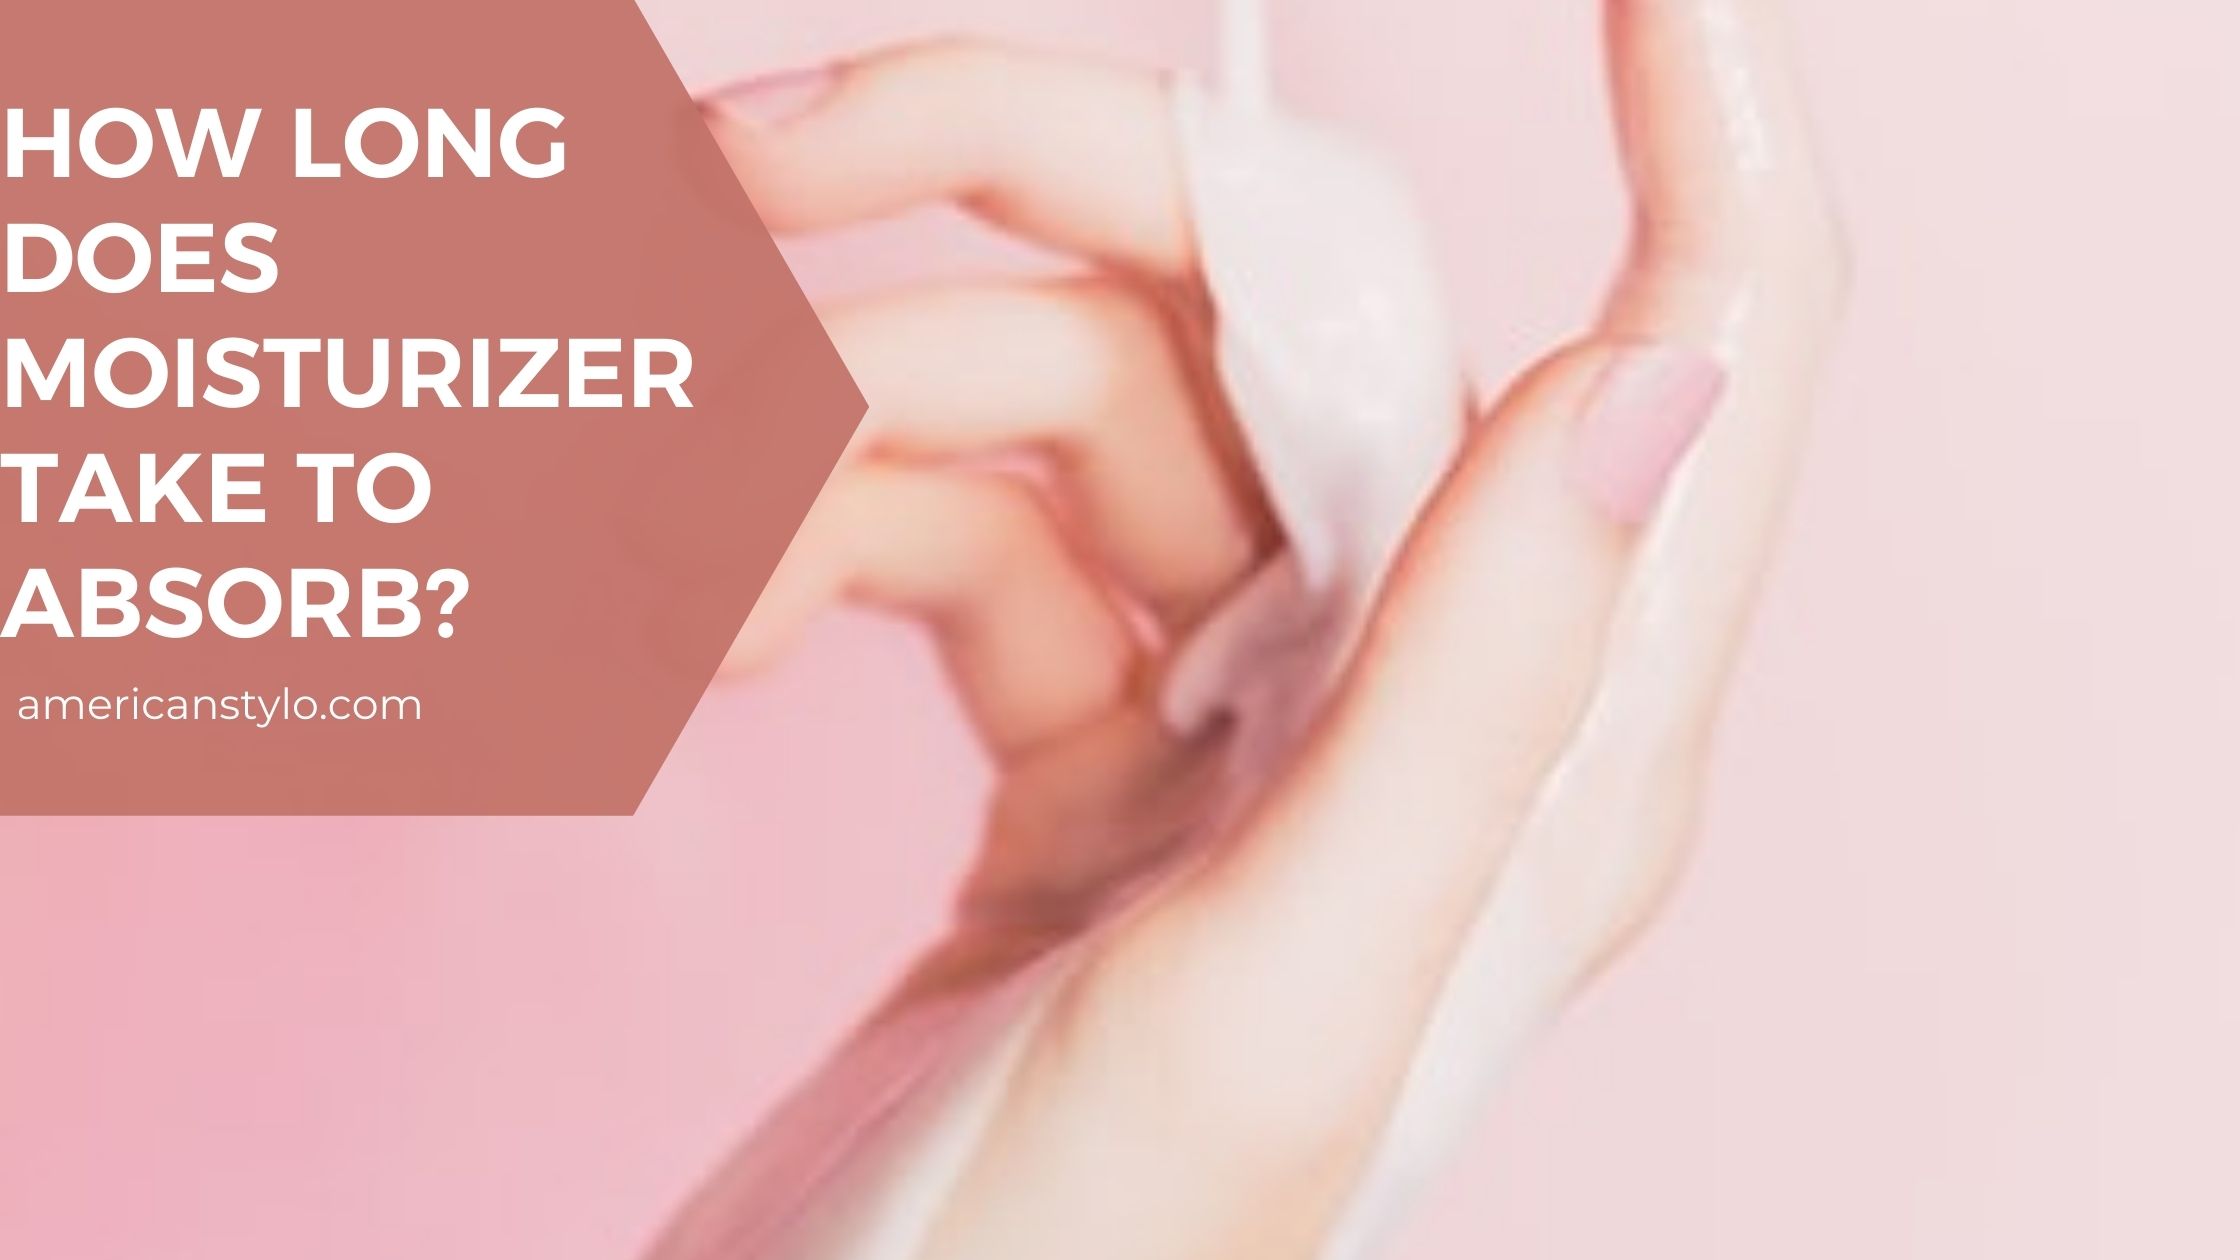 How long does moisturizer take to absorb?